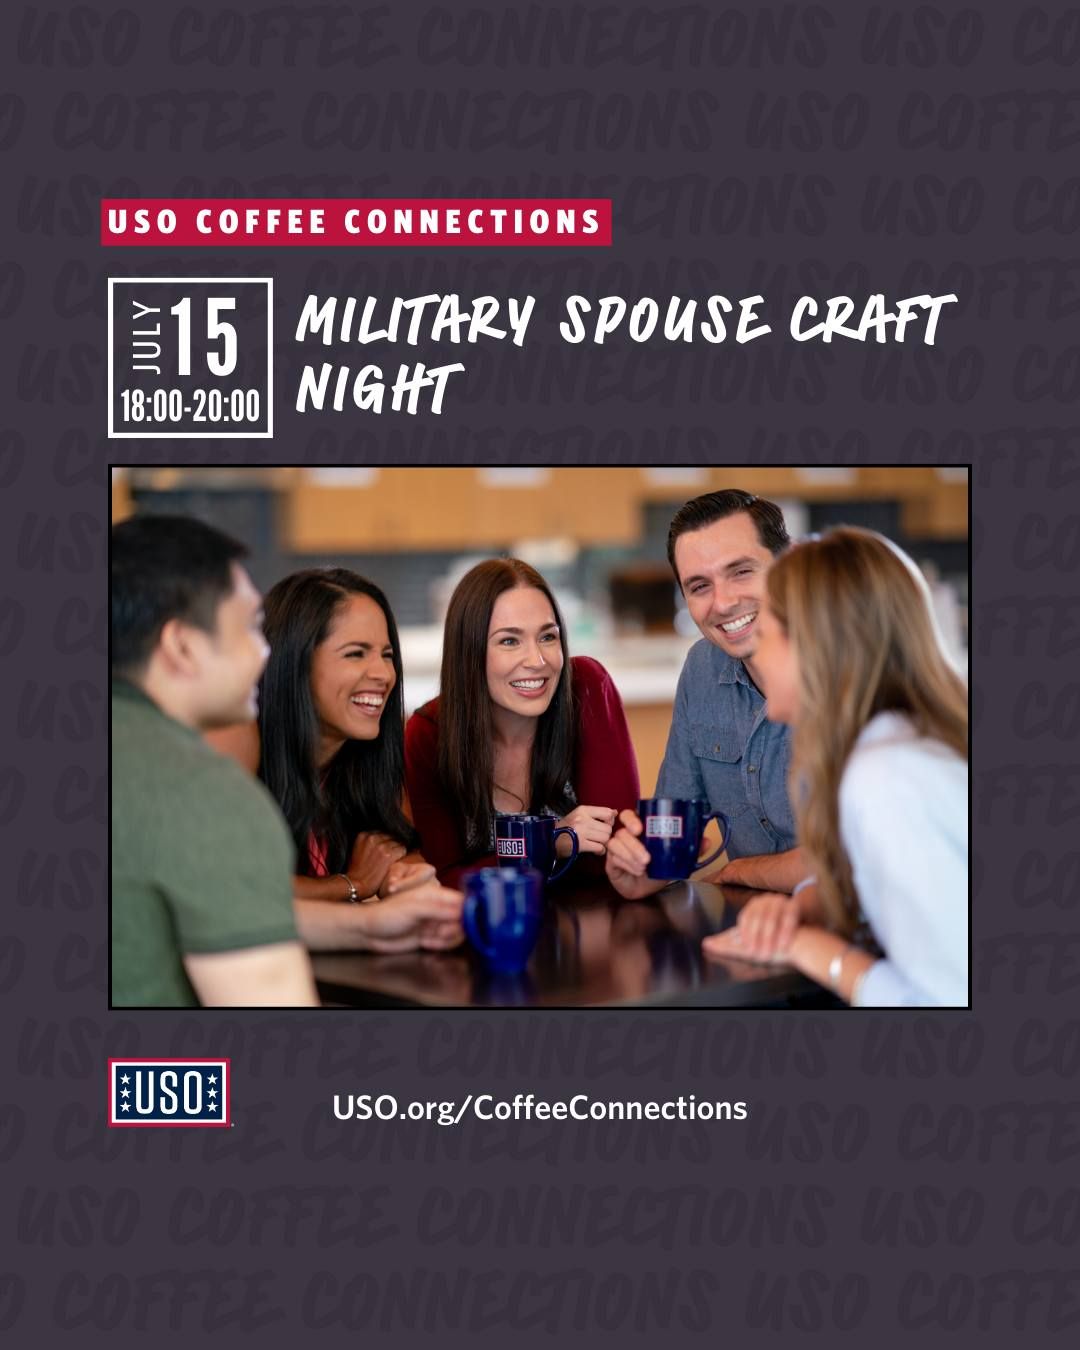 Coffee Connections Military Spouse Craft Night